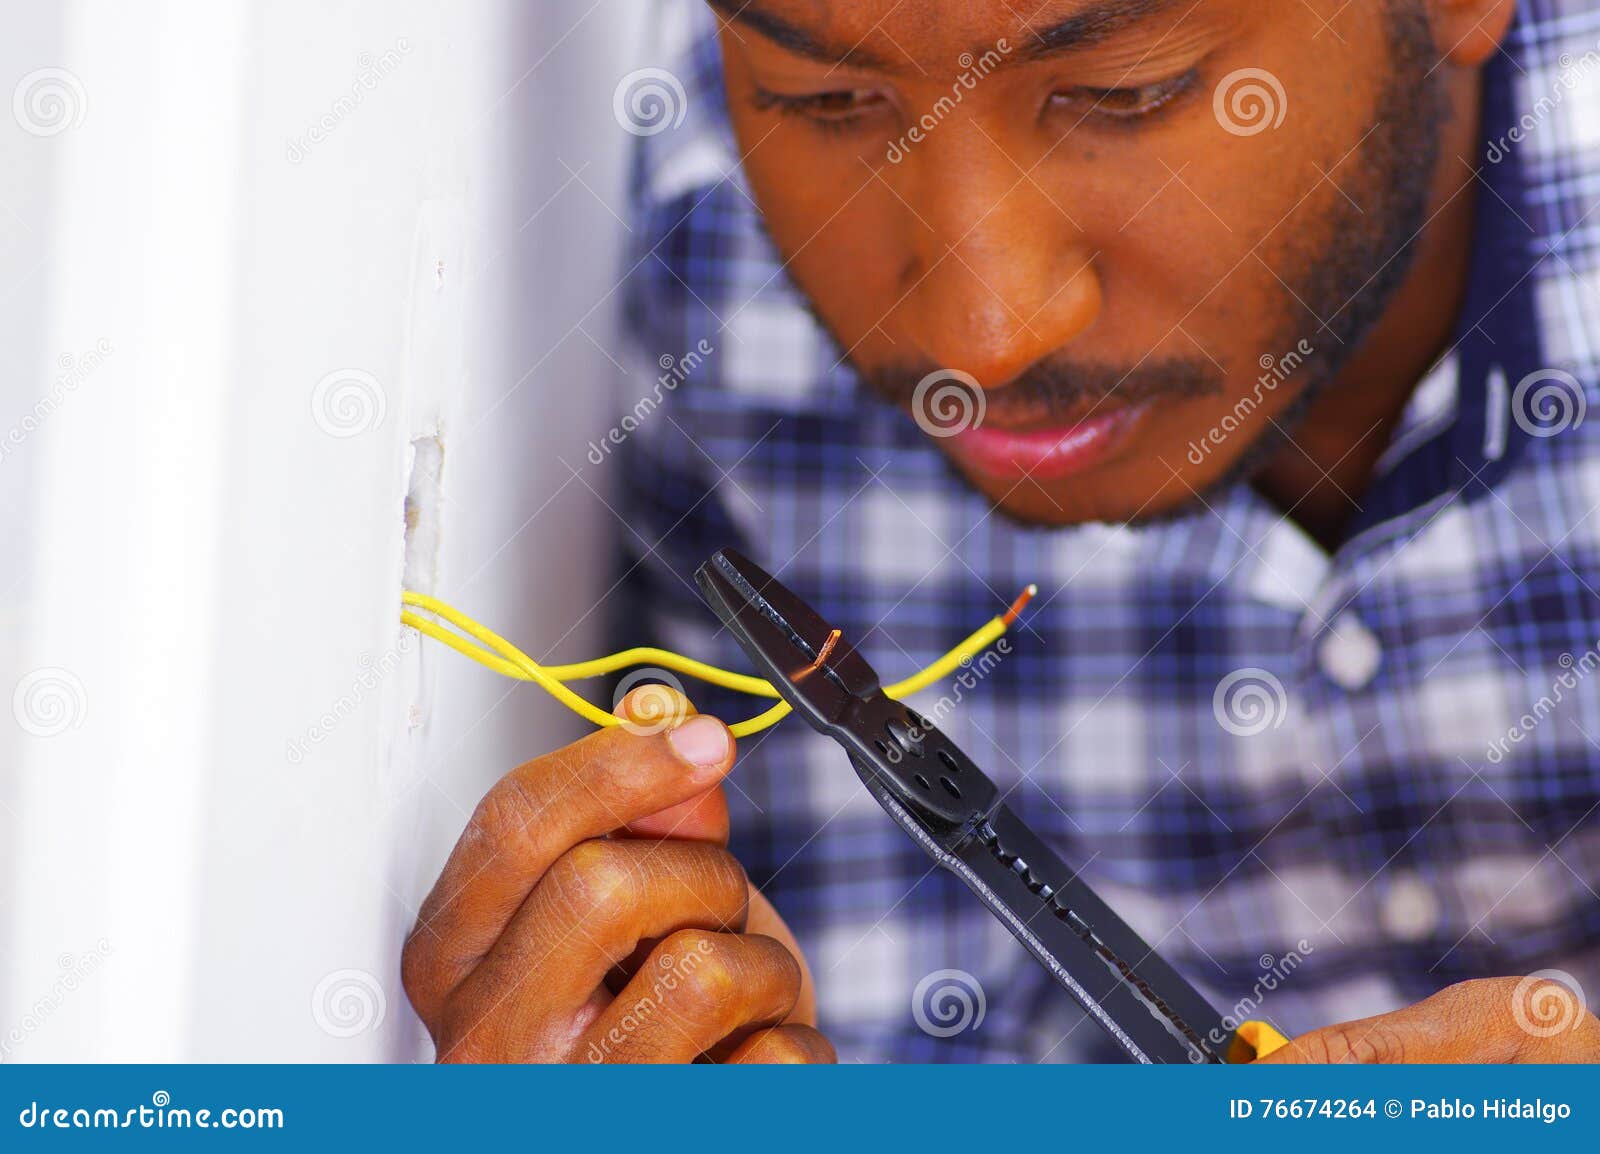 man wearing white and blue shirt working on electrical wall socket wires using screwdriver, electrician concept